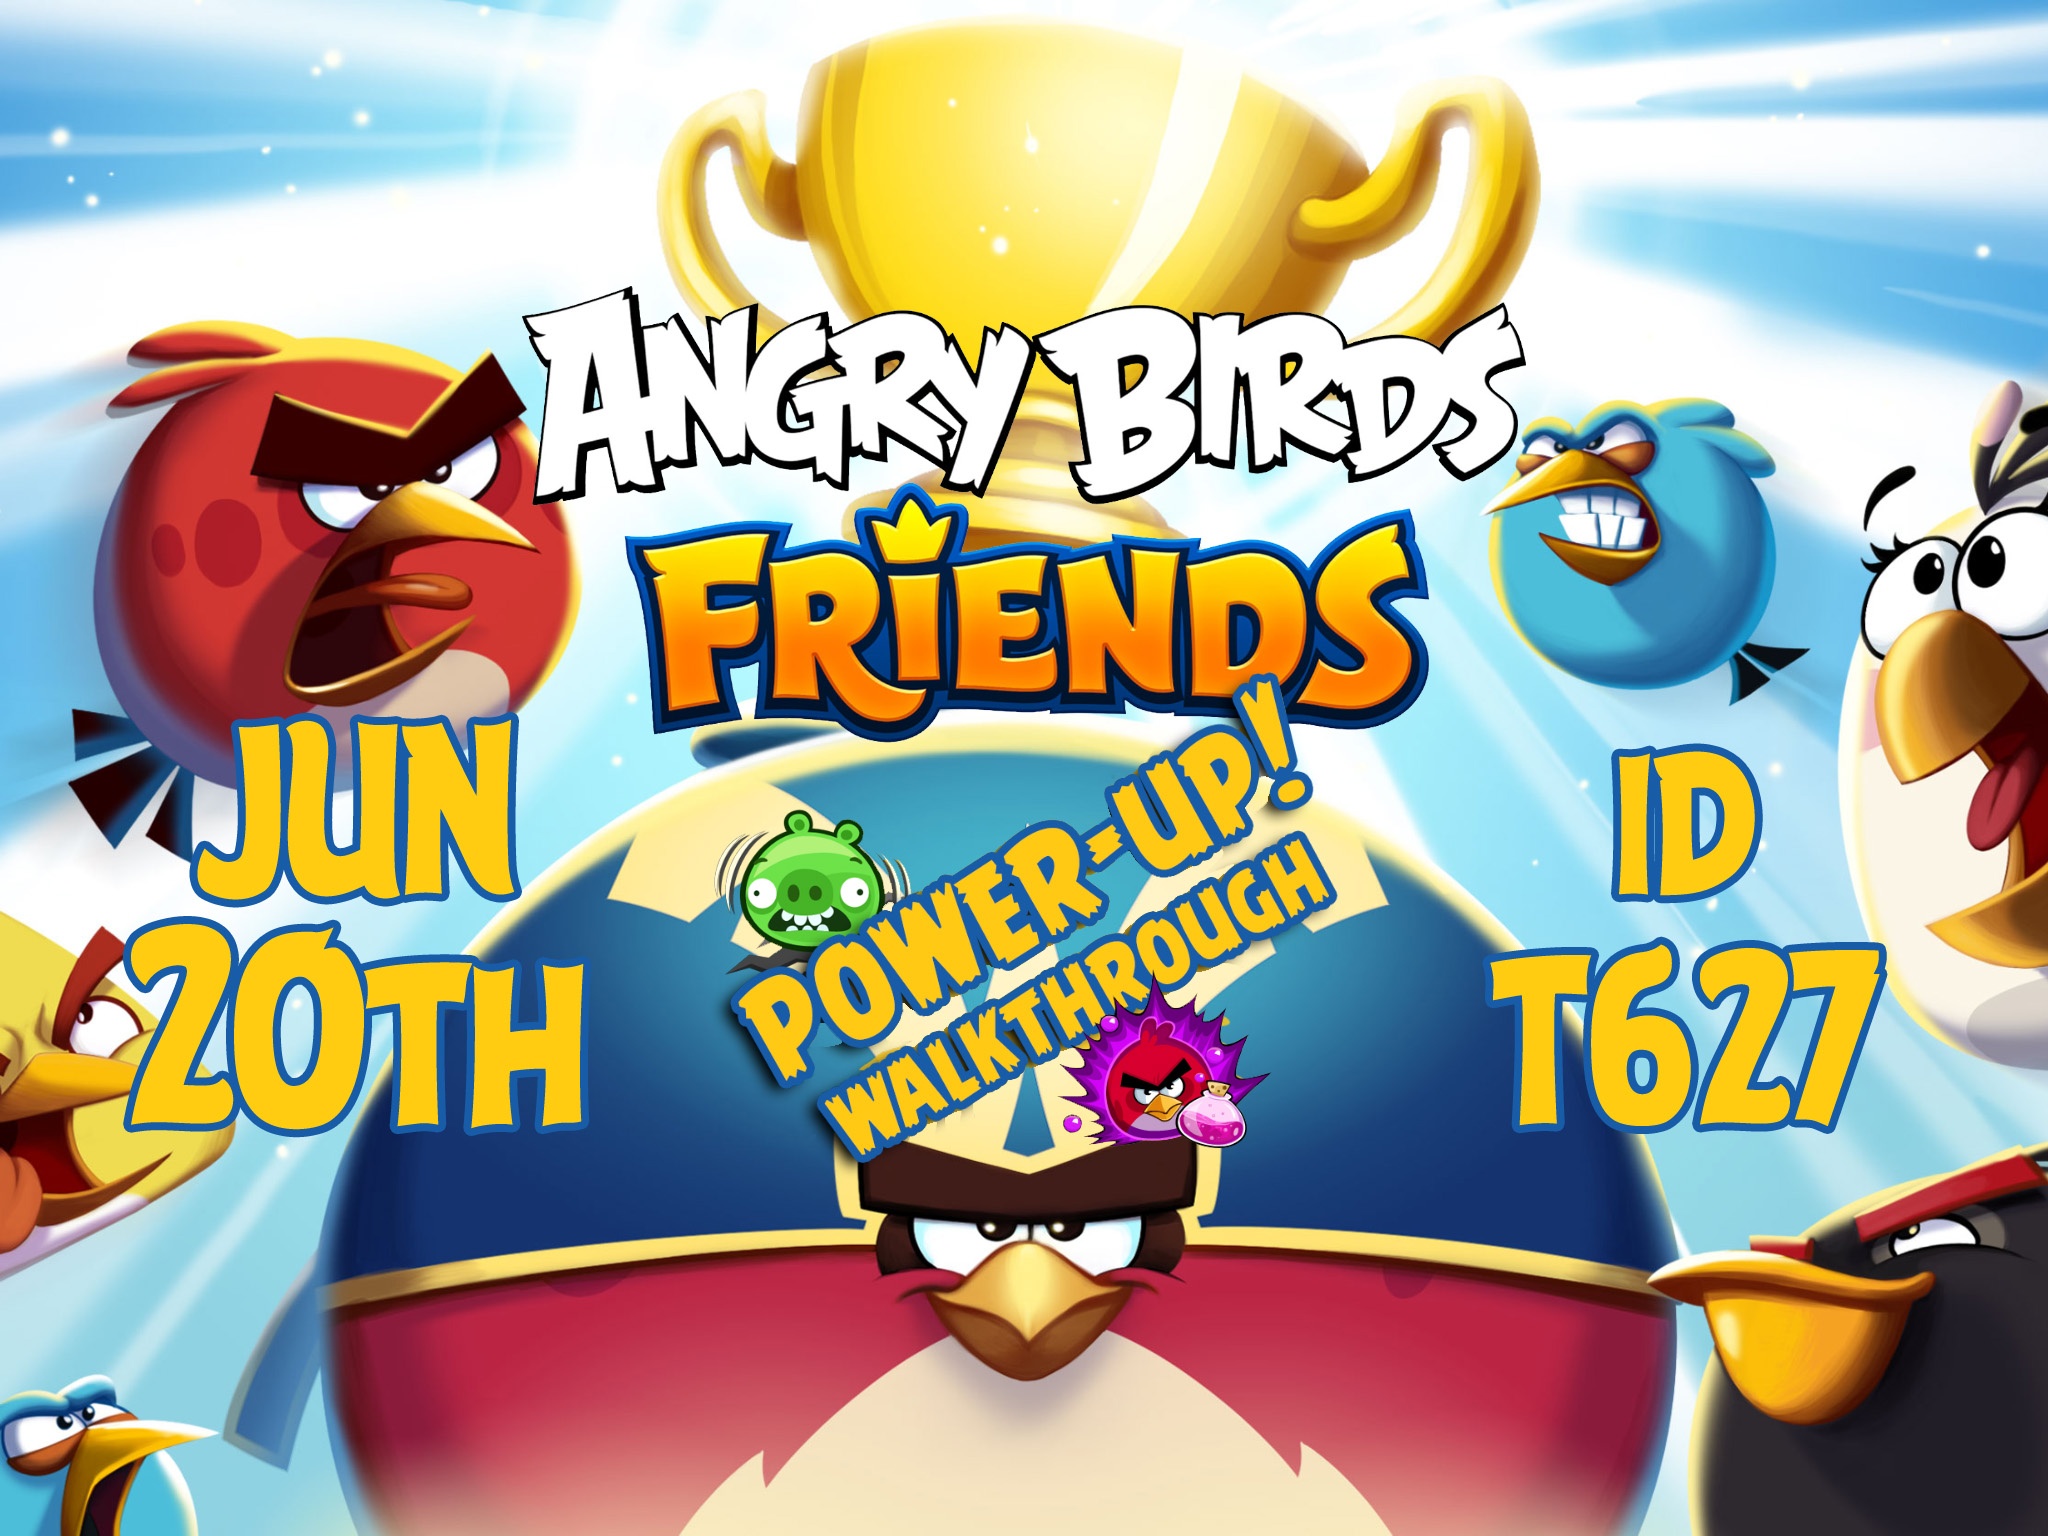 Angry-Birds-Friends-Tournament-T627-Feature-Image-PU